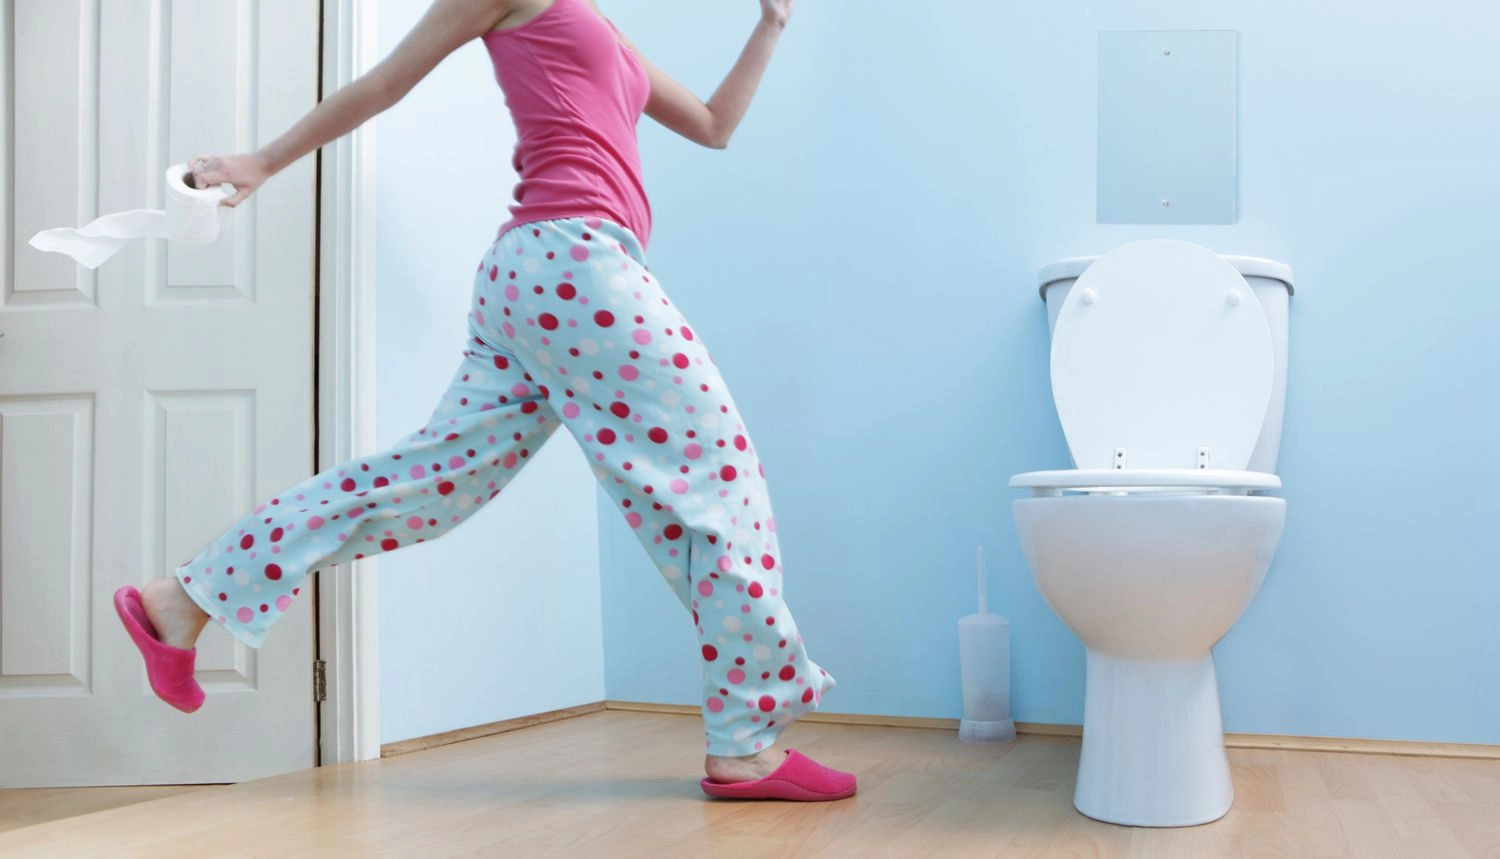 Lifestyle Factors that Contribute to Fecal Leakage